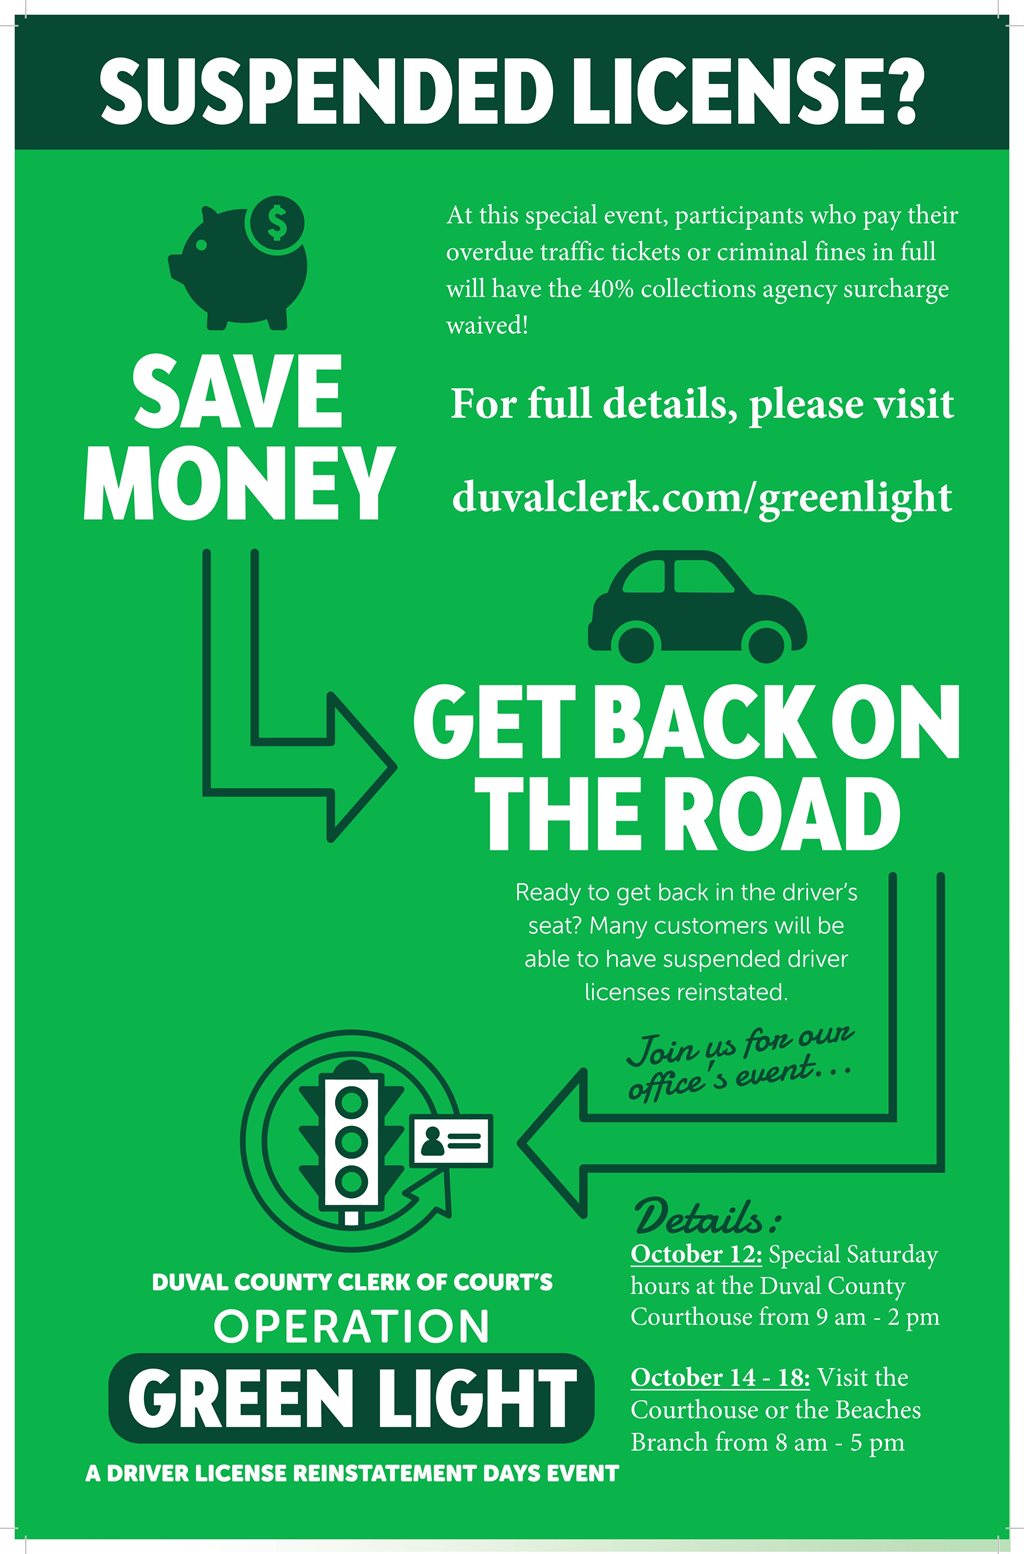 Duval County Clerk of Courts Operation Green Light Poster